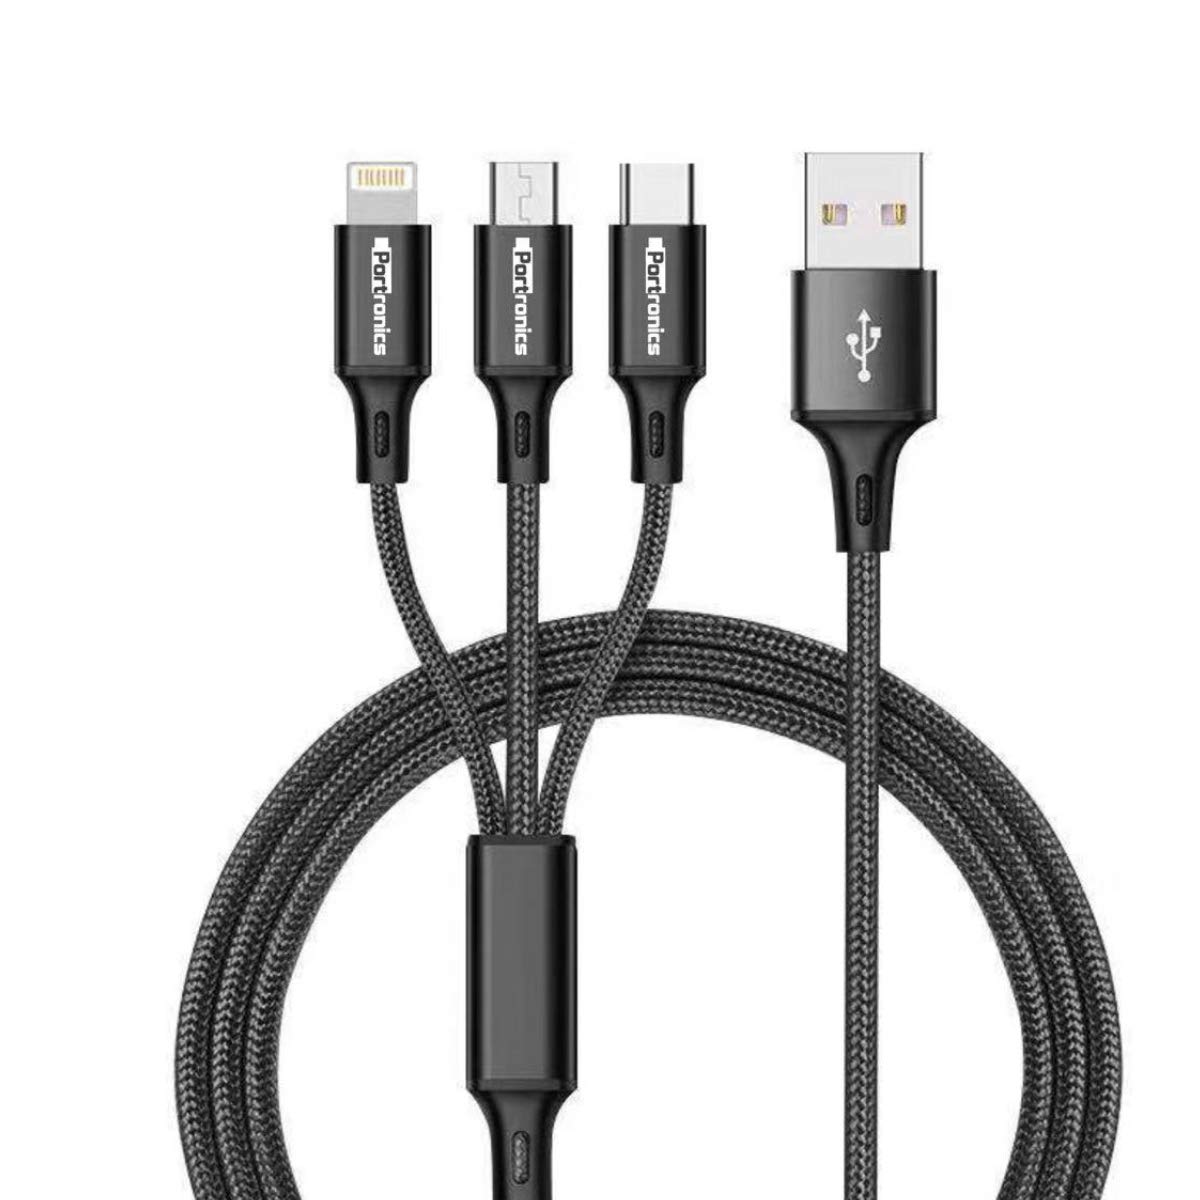 PORTRONICS 1051 KONNECT TRIO+ 3IN1 USB CABLE